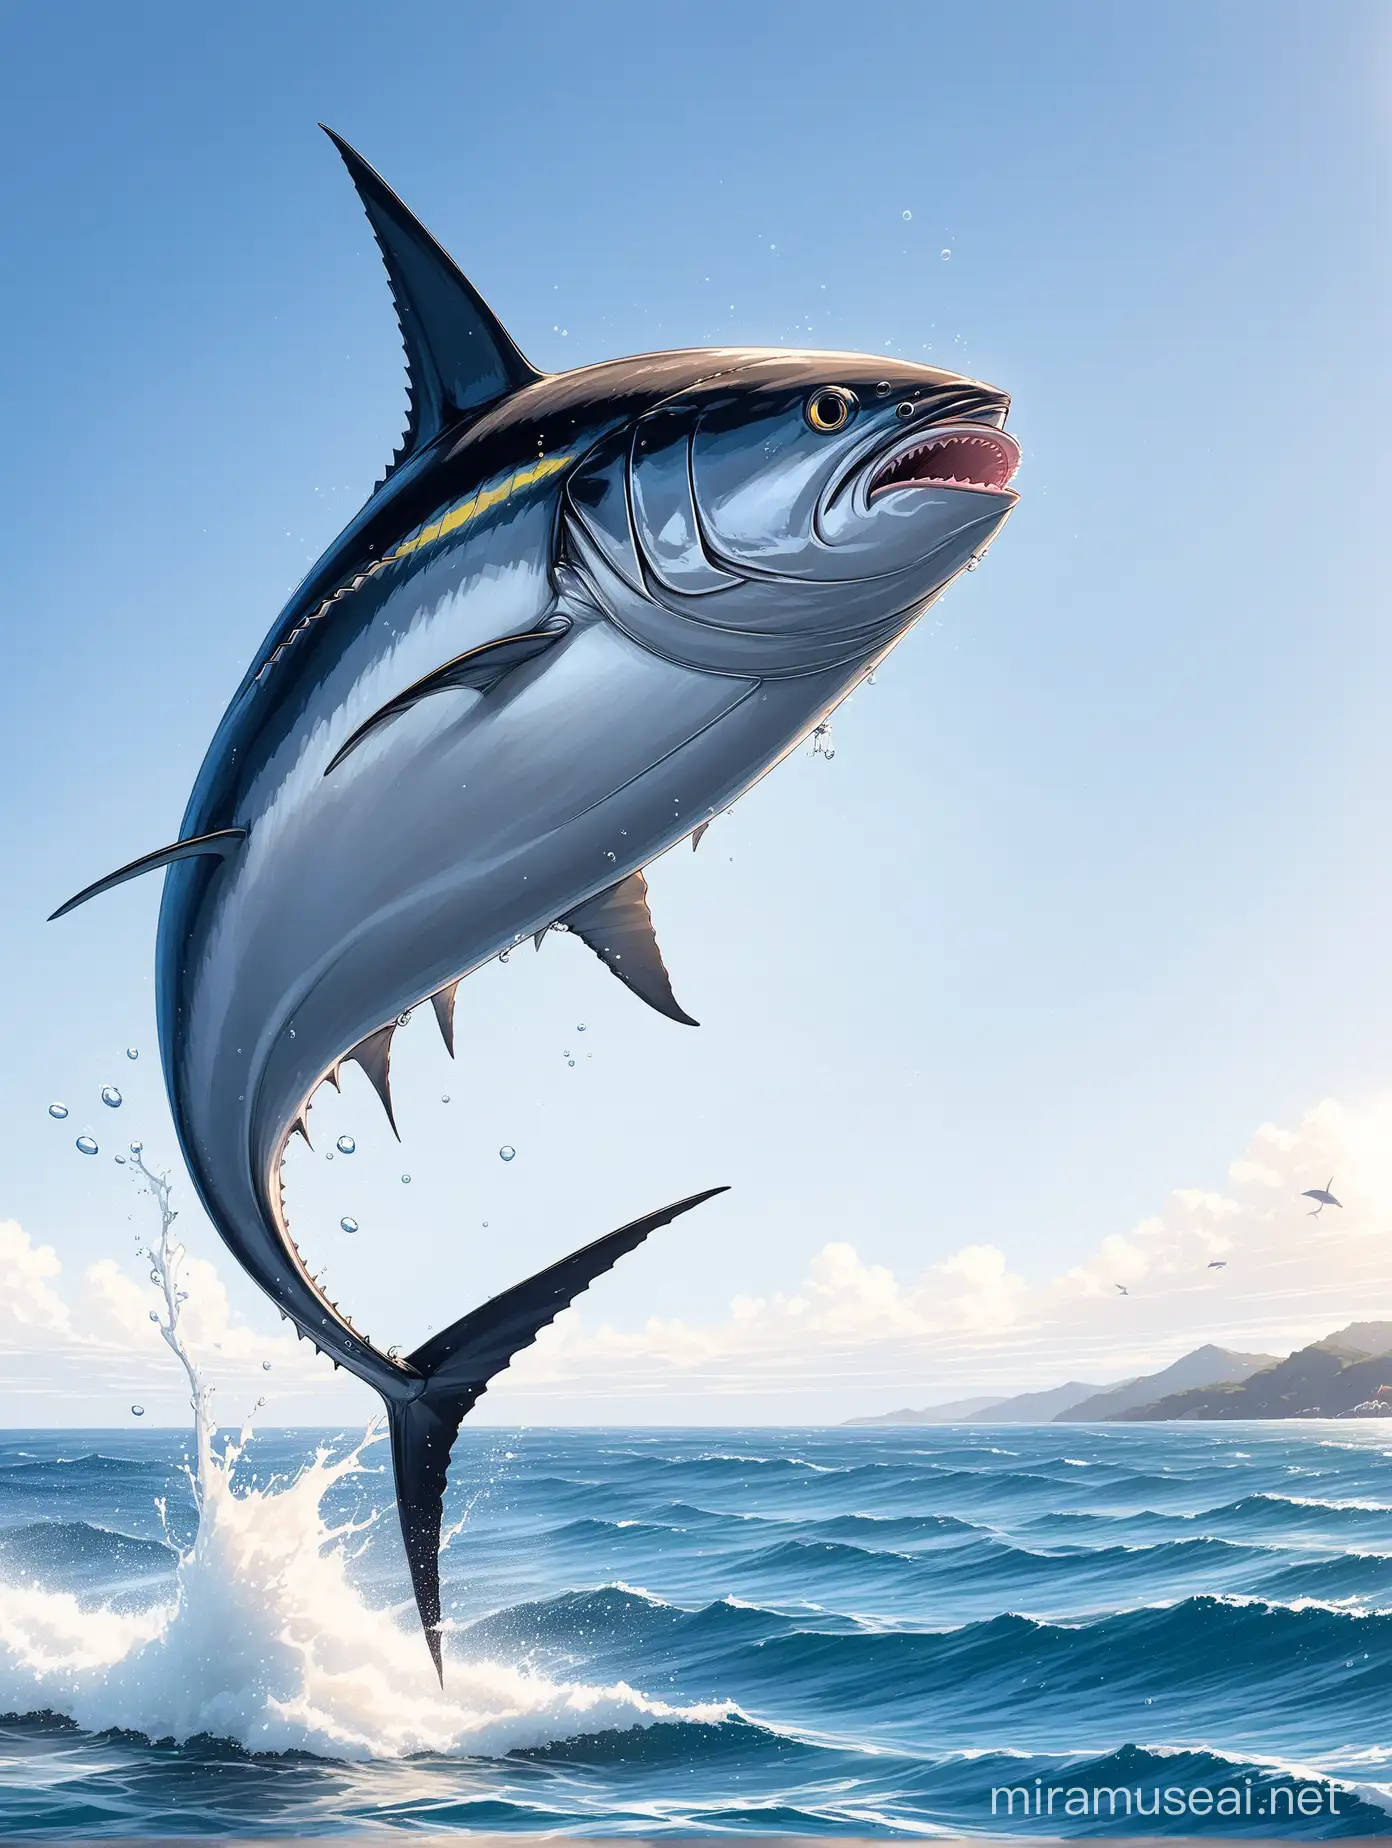 Tuna Fish Leaping from Ocean Waves